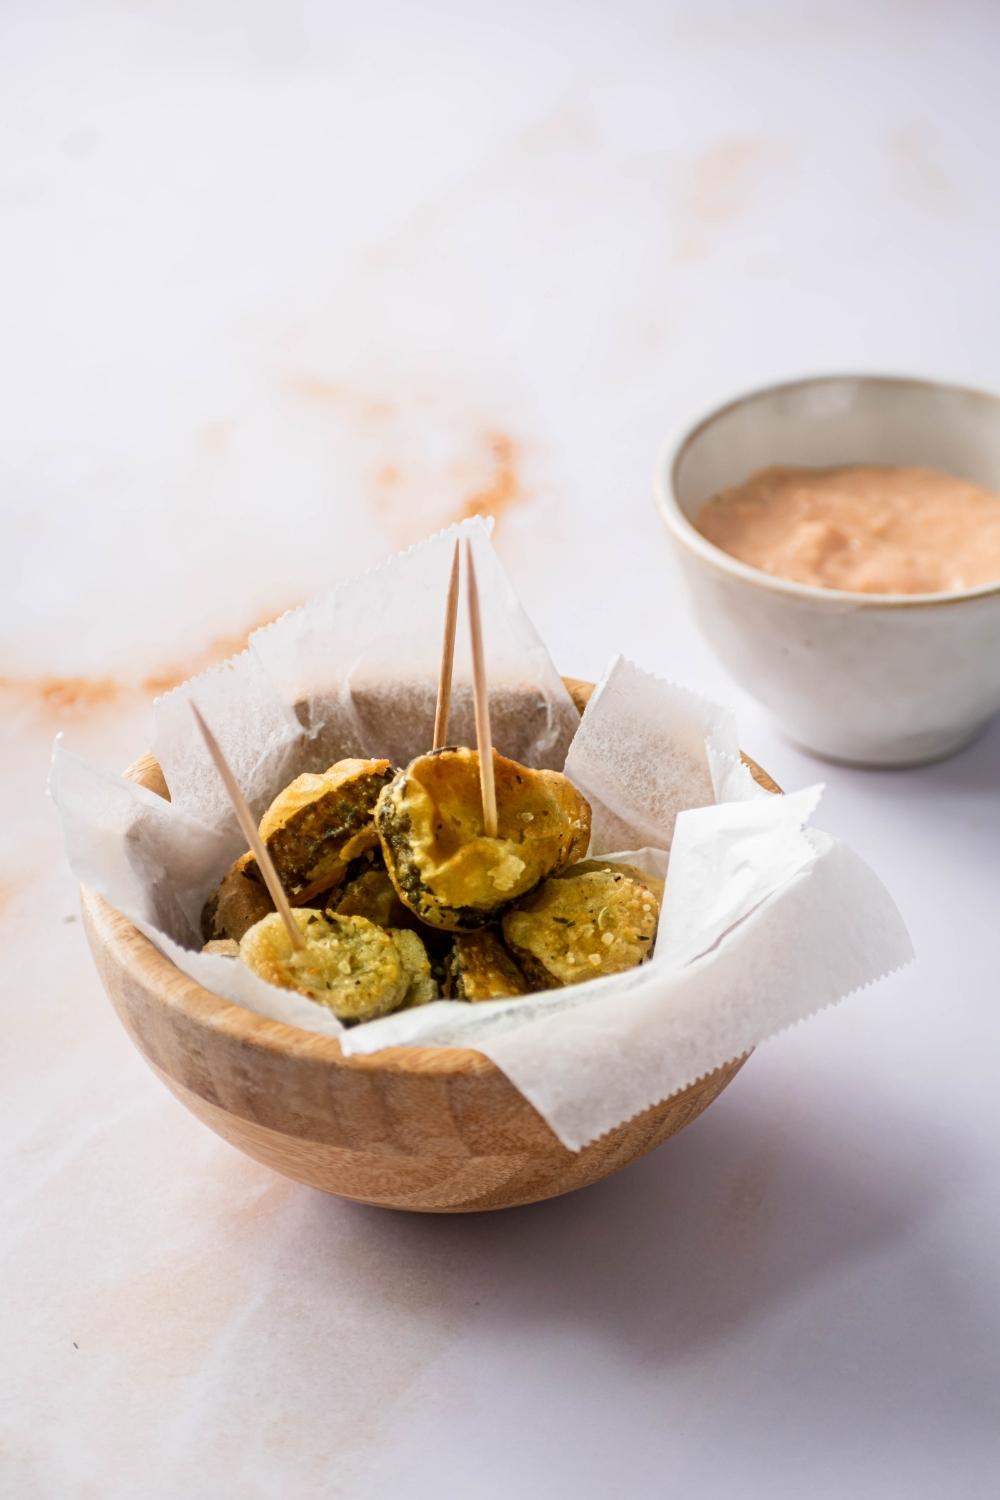 A bunch of fried pickle slices on parchment paper and a wooden bowl on a white counter. Behind the wooden bowl is a white bowl with a dipping sauce in it..